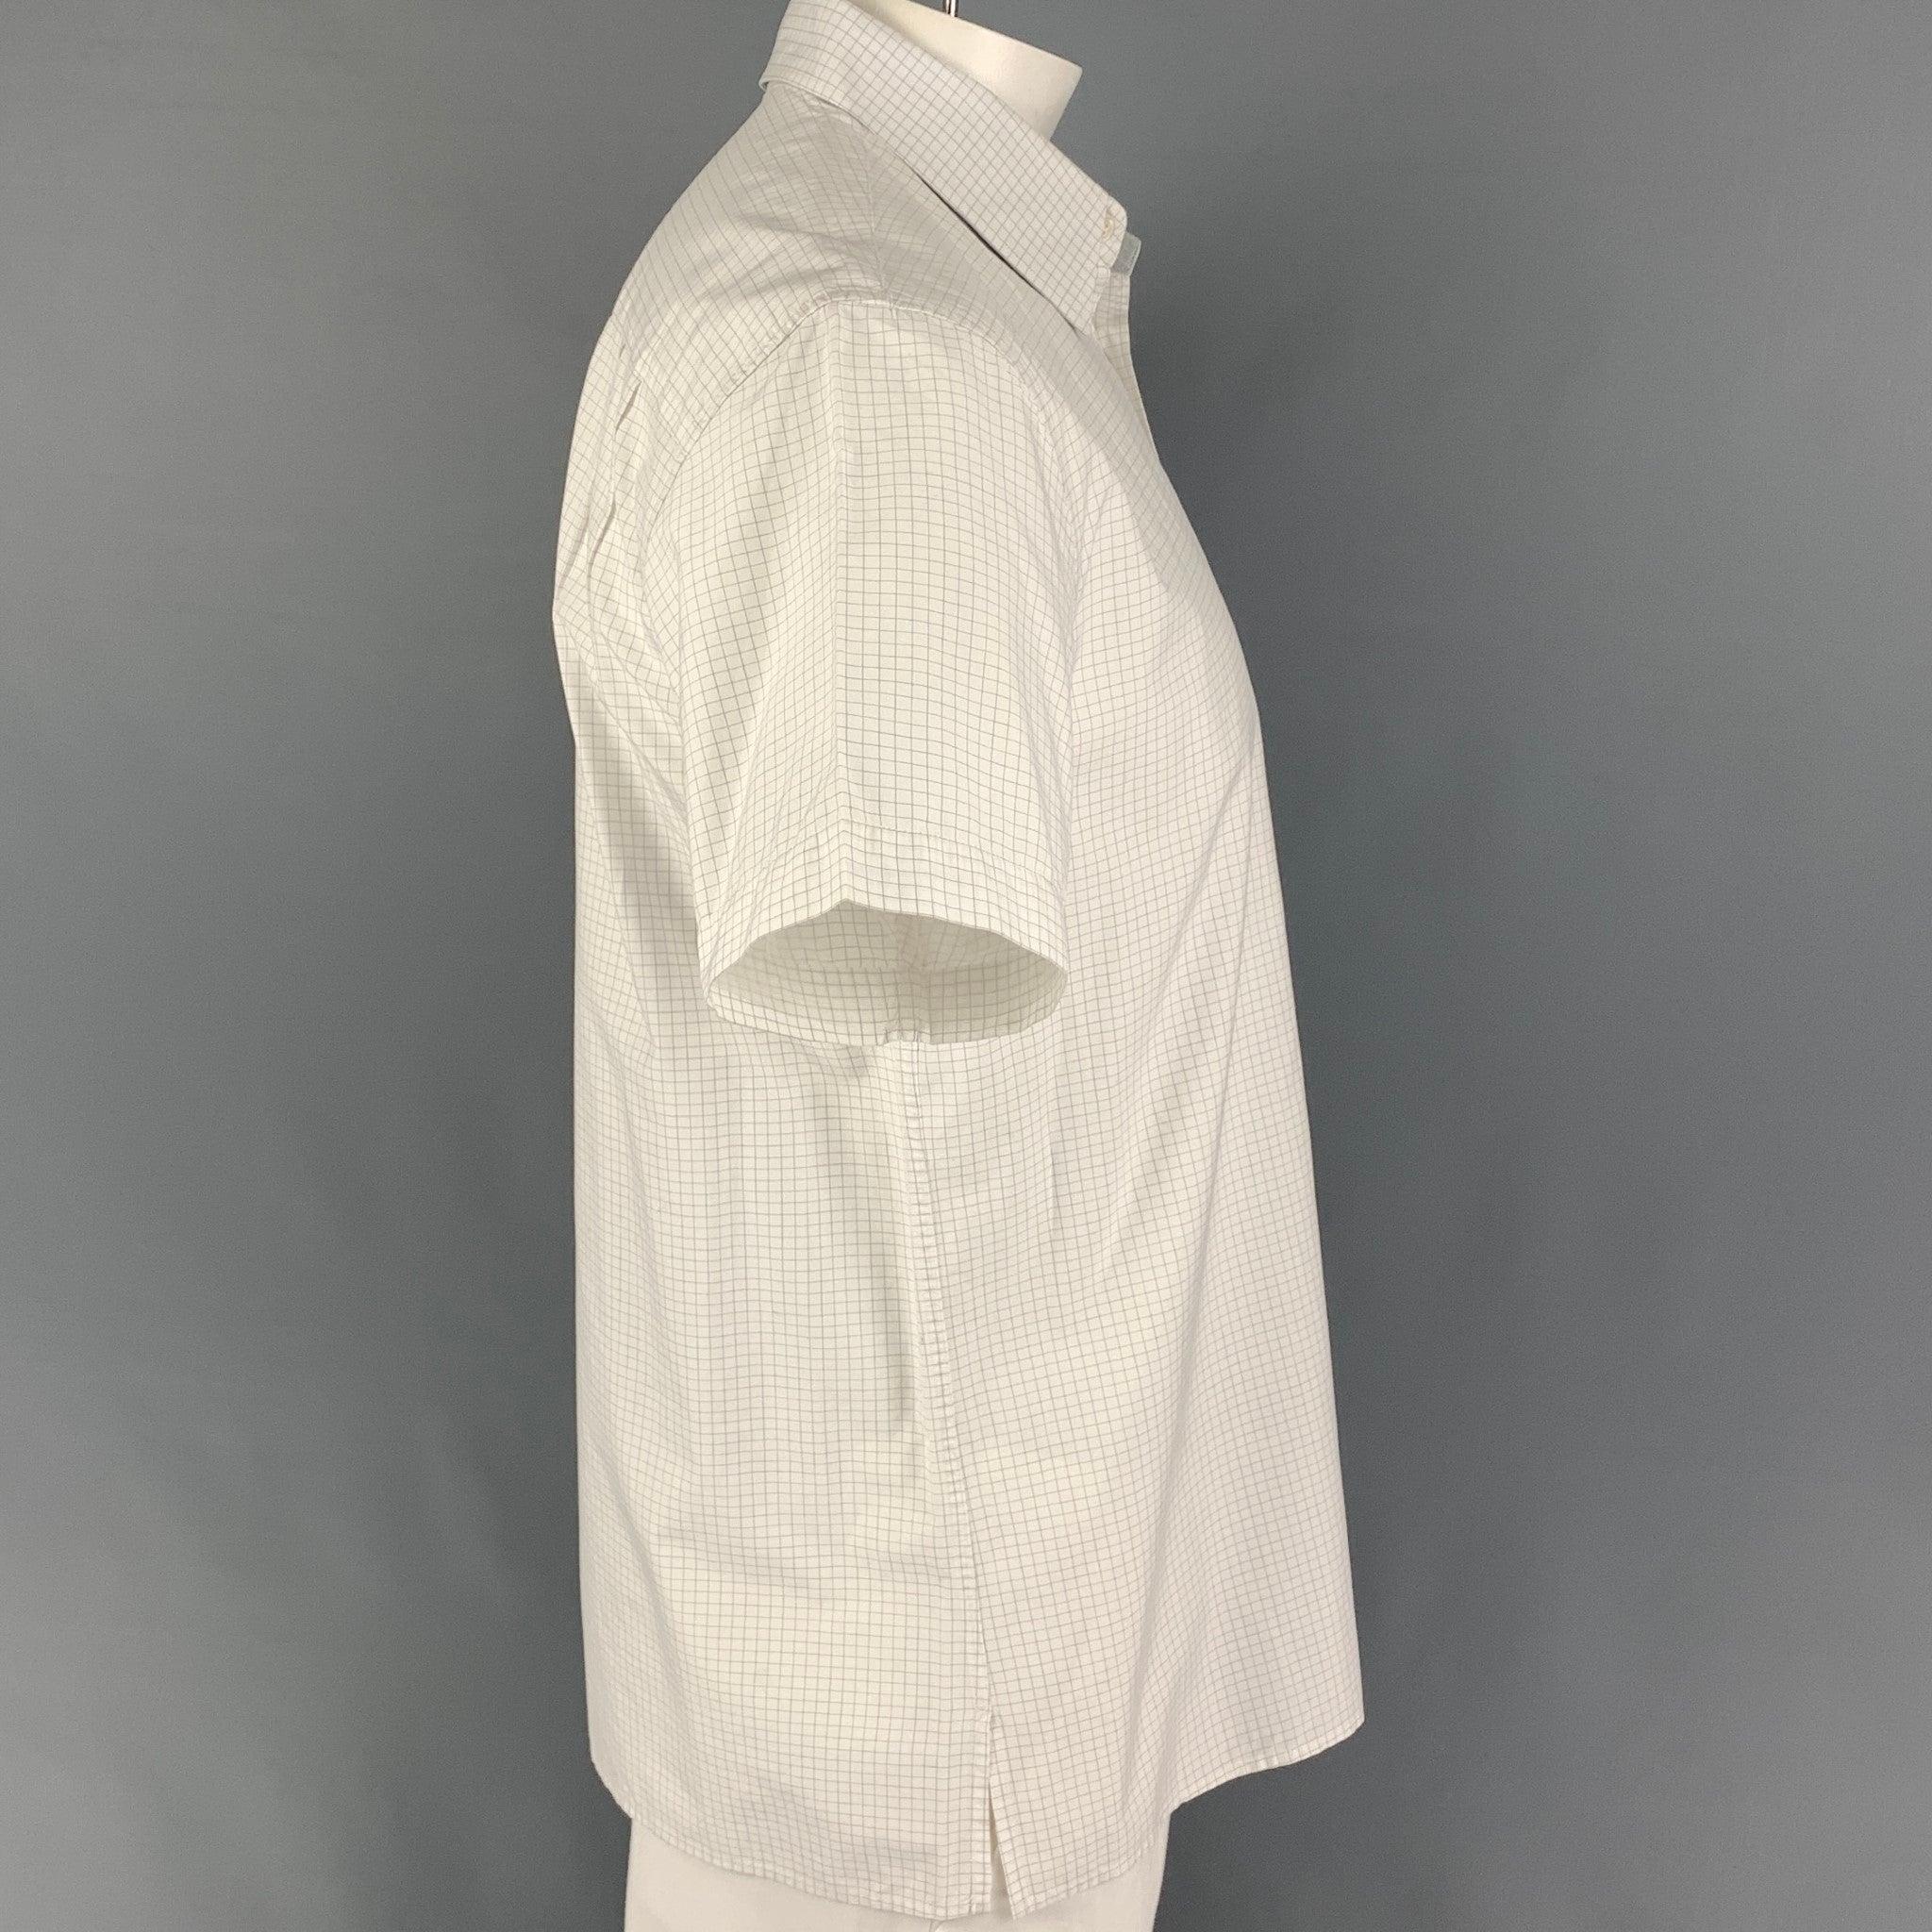 MARC JACOBS short sleeve shirt comes in a white grid print cotton featuring a spread collar, patch pocket, and a button up closure. Made in Italy.
 Good
 Pre-Owned Condition. Light discoloration at front. As-is.  
 

 Marked:  50 
 

 Measurements: